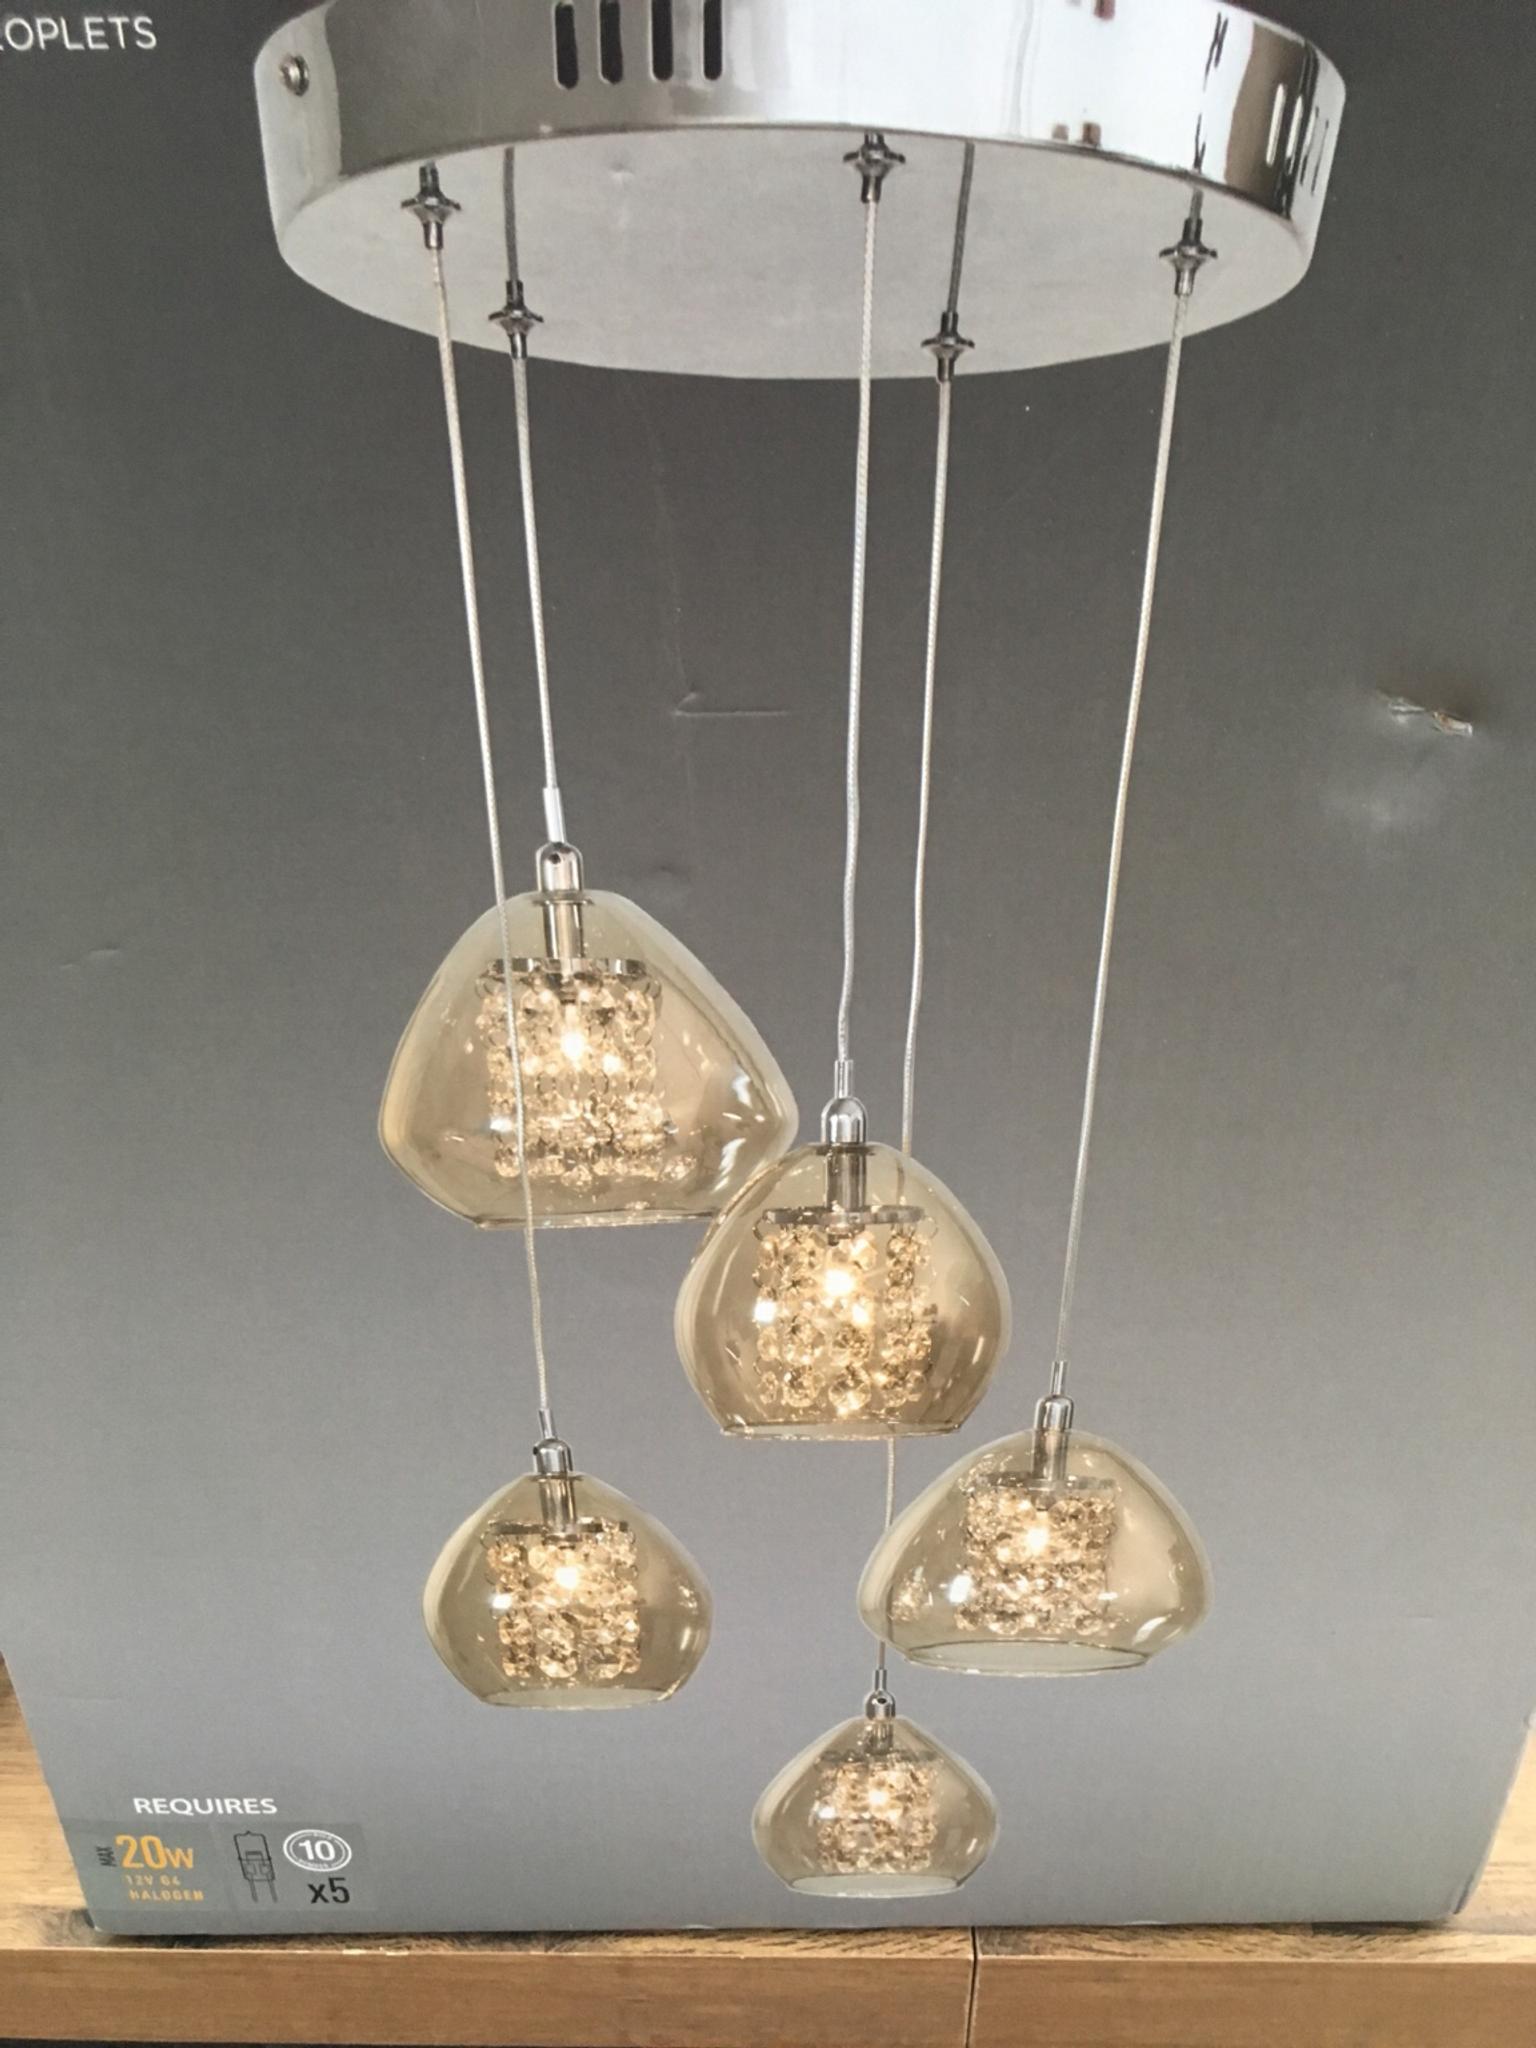 Next Mink Bella Ceiling Light New In Wakefield For 40 00 For Sale